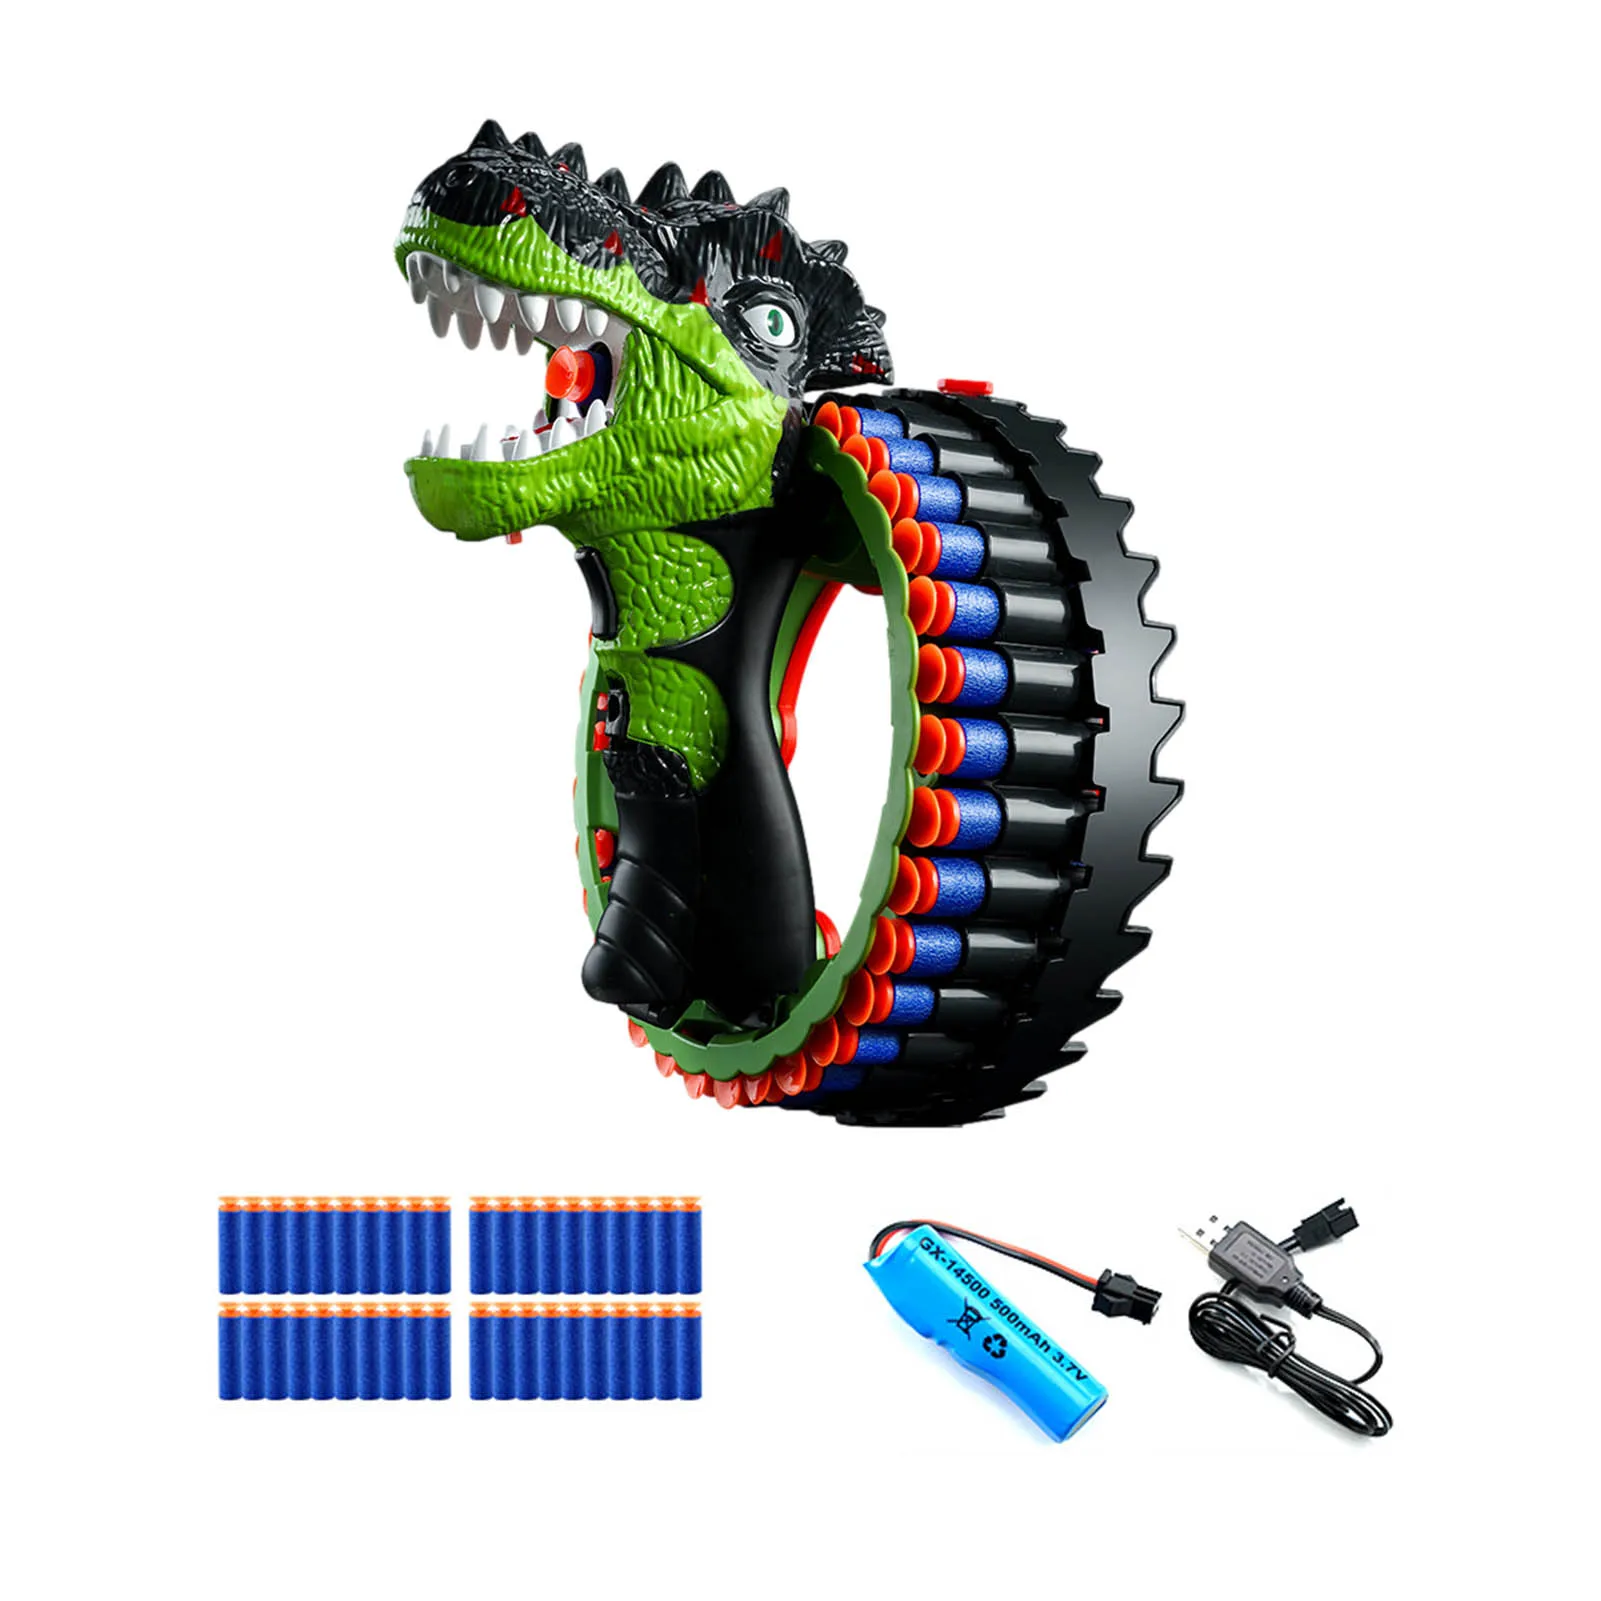 

Electric Dinosaur Shooting Toys Kids Dinosaur Blast Dart Blaster Dart Storage Soft Bullet Toy With Rechargeable Battery For Boys